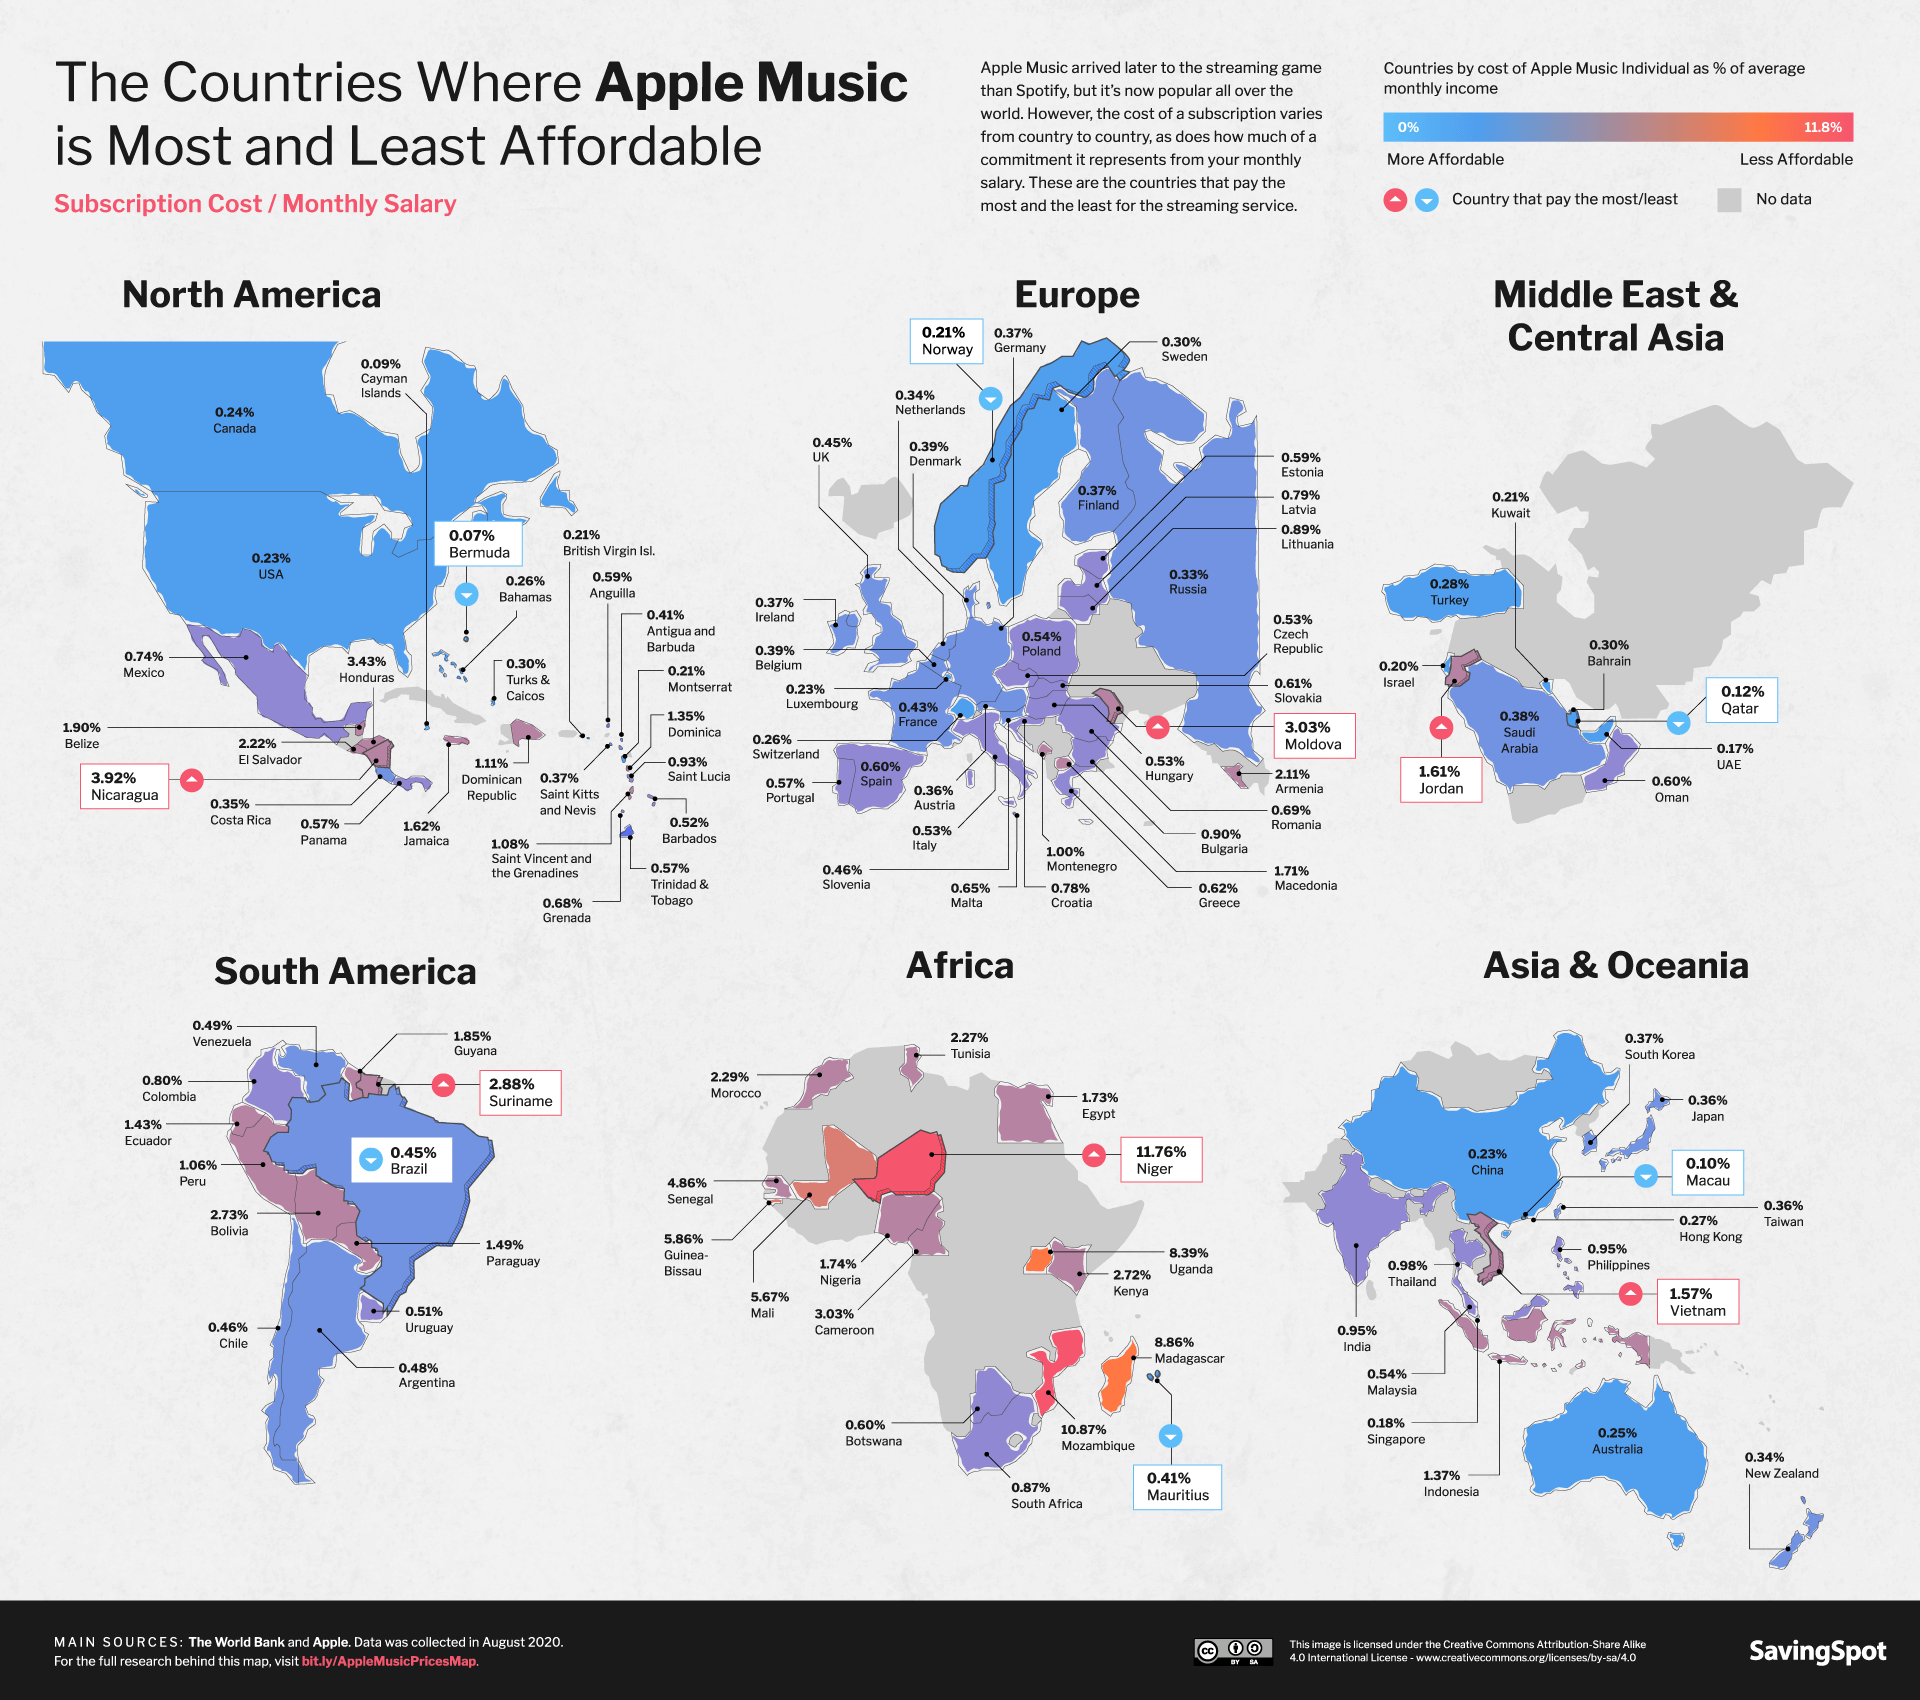 The Countries Where Apple Music is Most (and Least) Affordable Based on Monthly Income